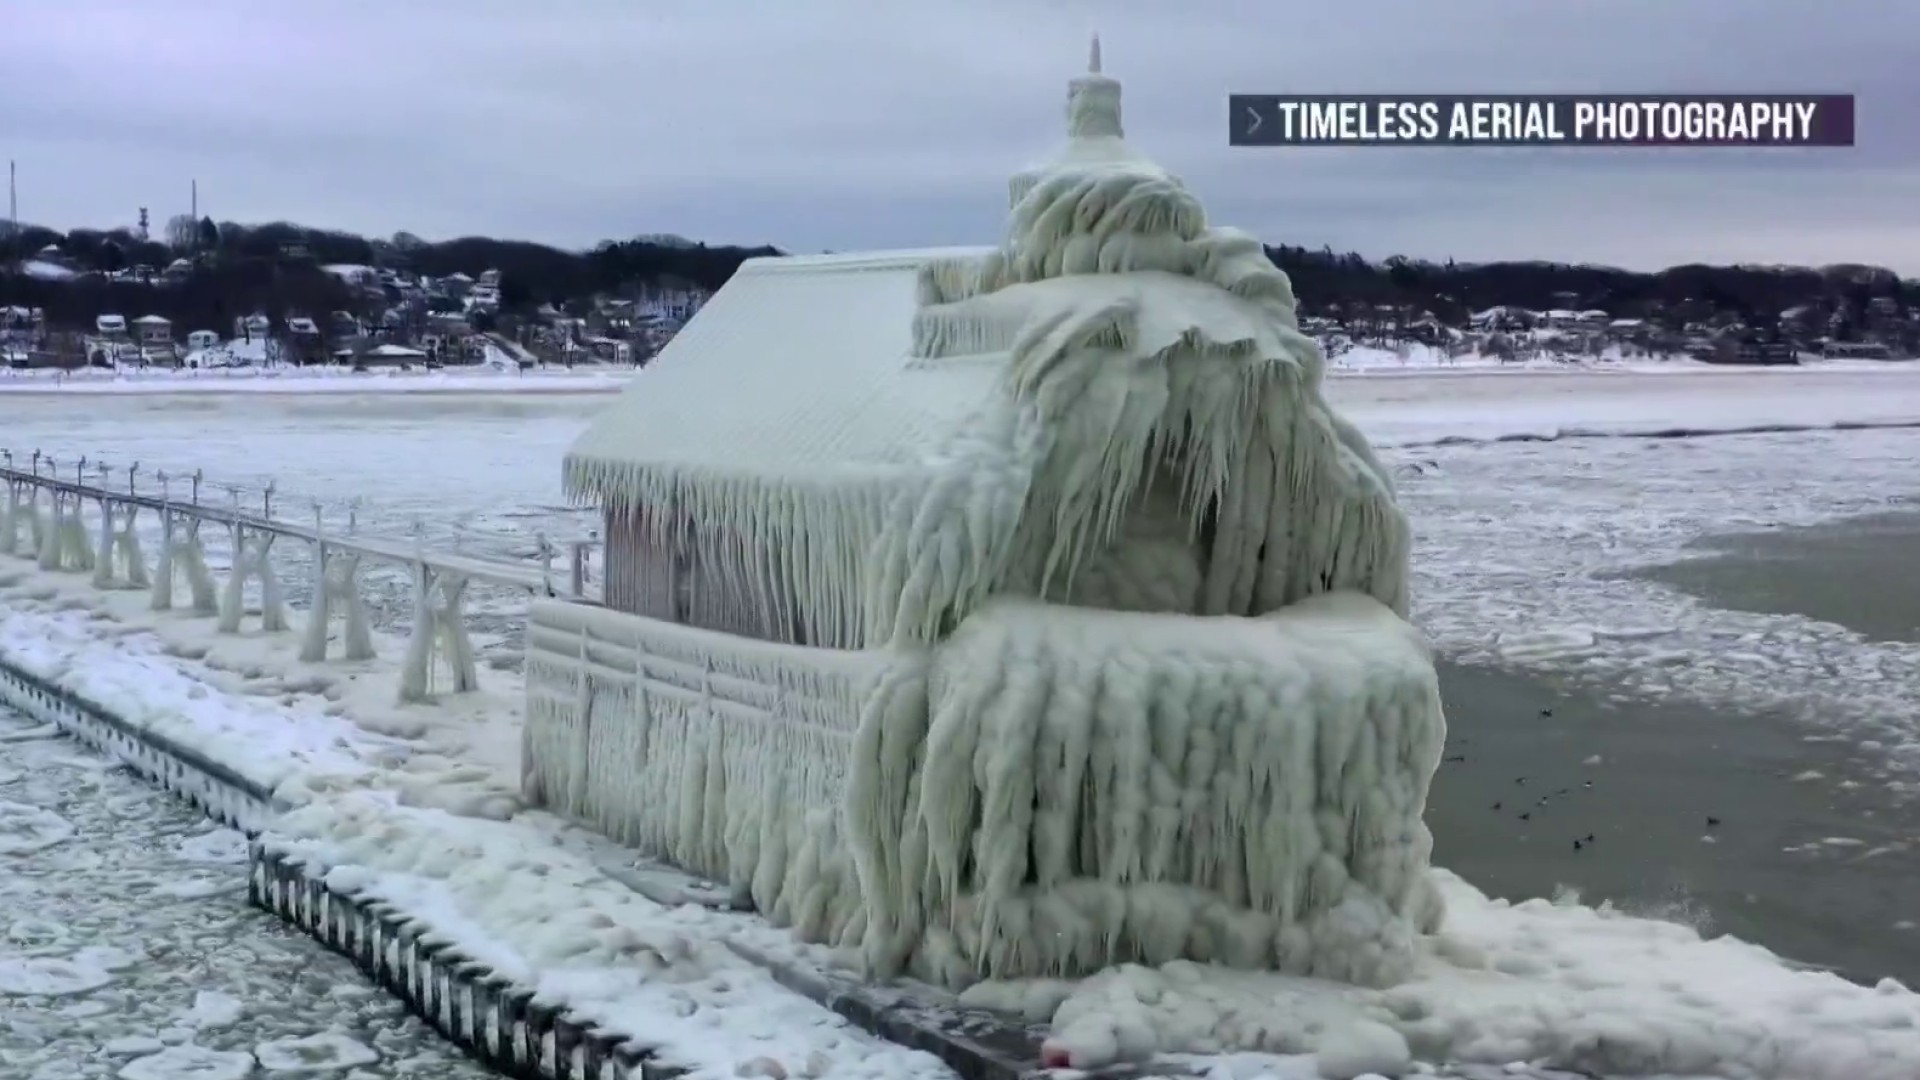 Deep freeze' continues moving through the Midwest and South